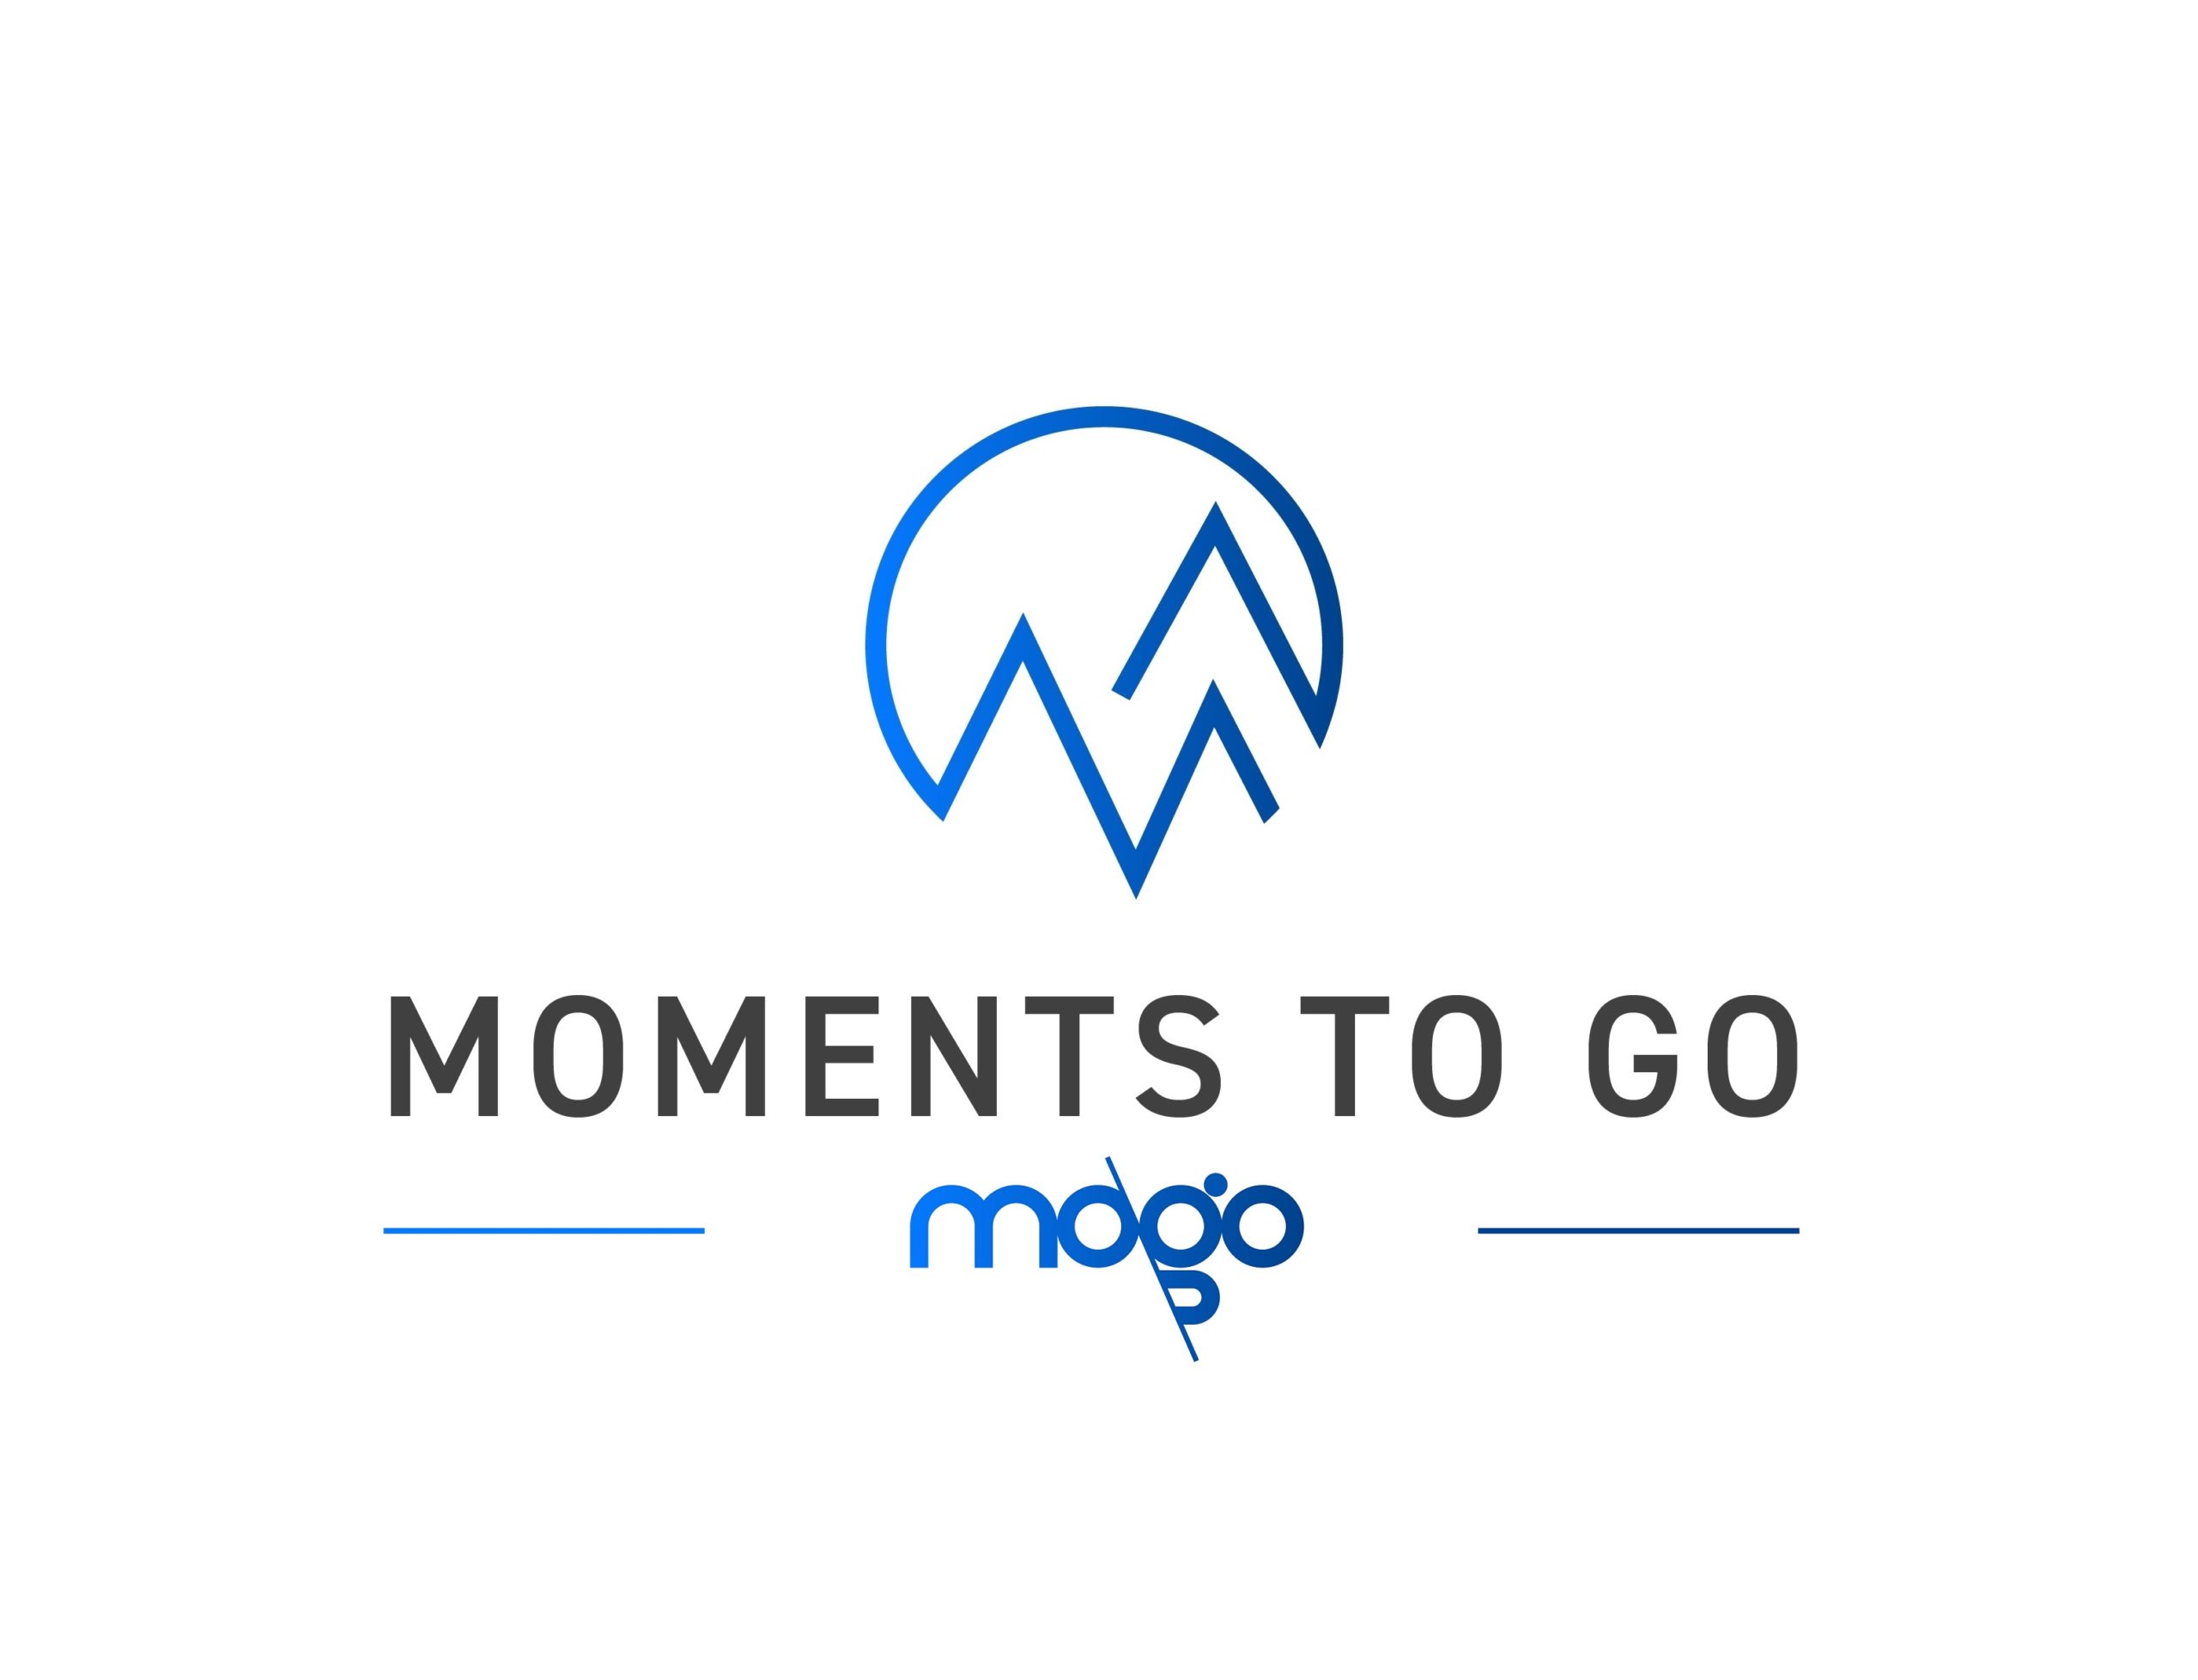 Moments to go